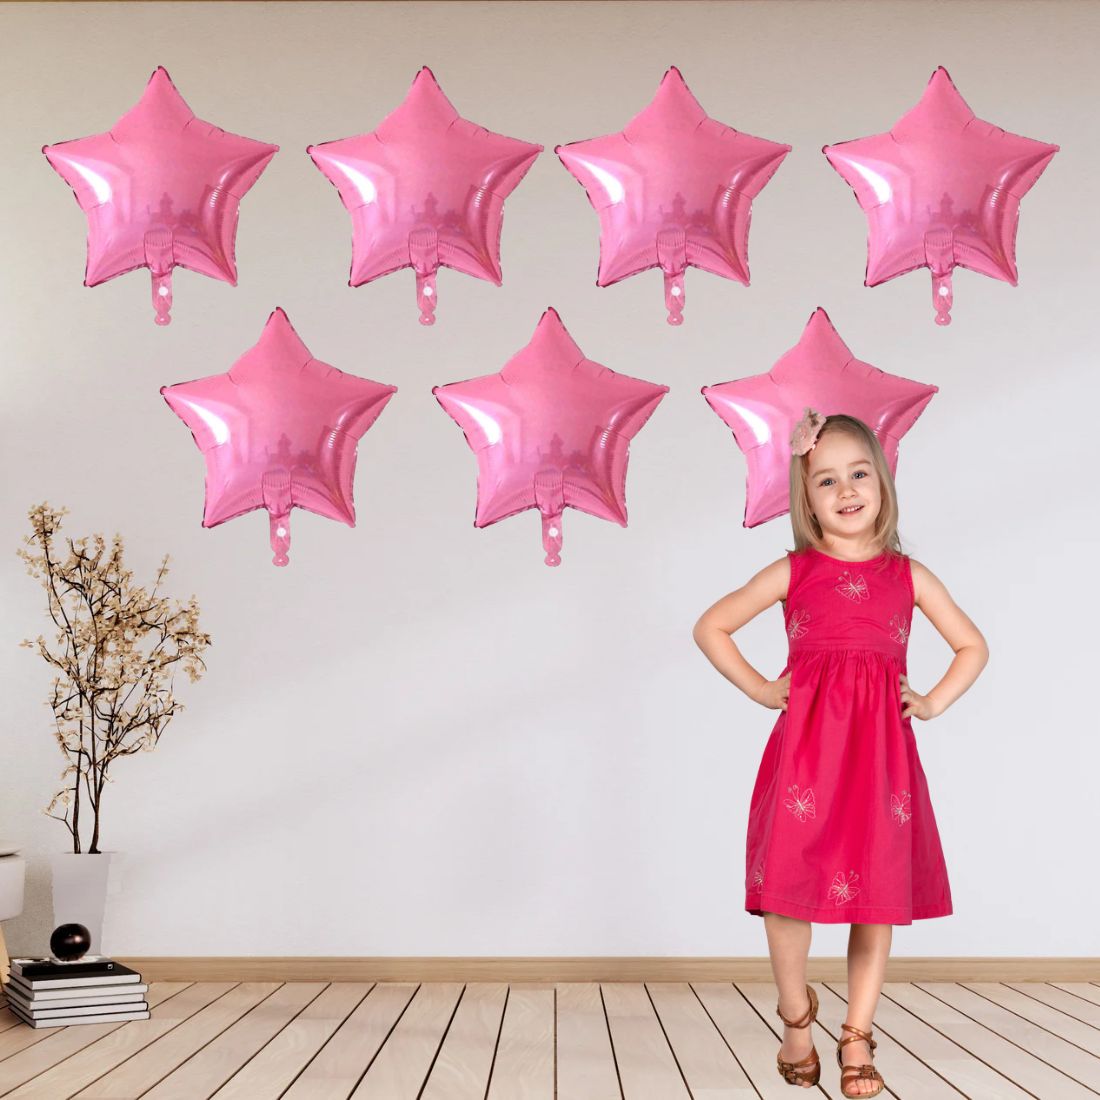 5″ Pink Star Foil Balloon for Birthday Party, Anniversary Pack of 10